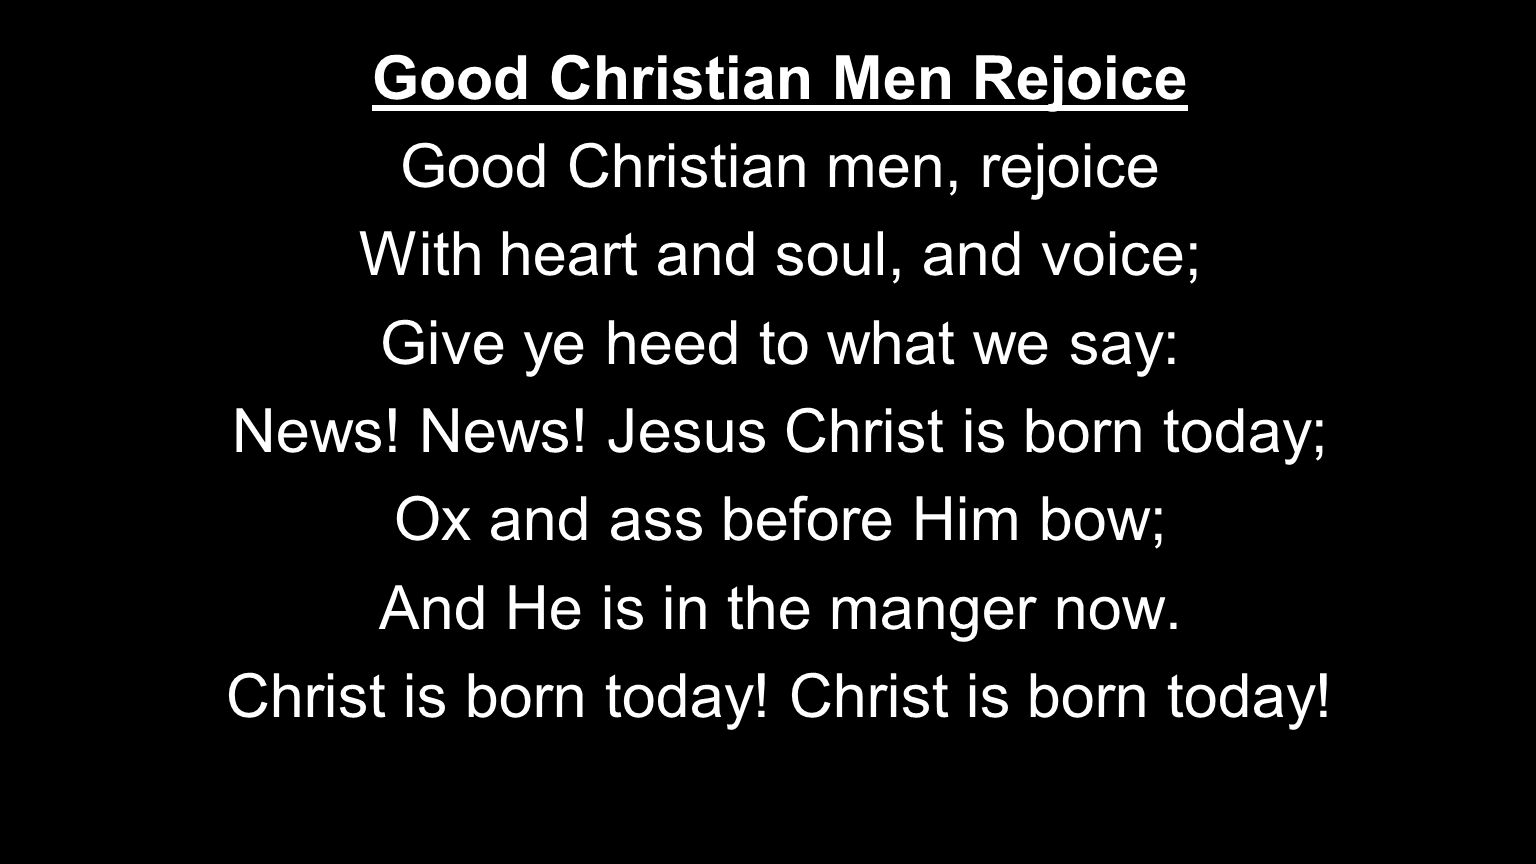 Good Christian Men Rejoice Good Christian men, rejoice With heart and soul, and voice; Give ye heed to what we say: News.